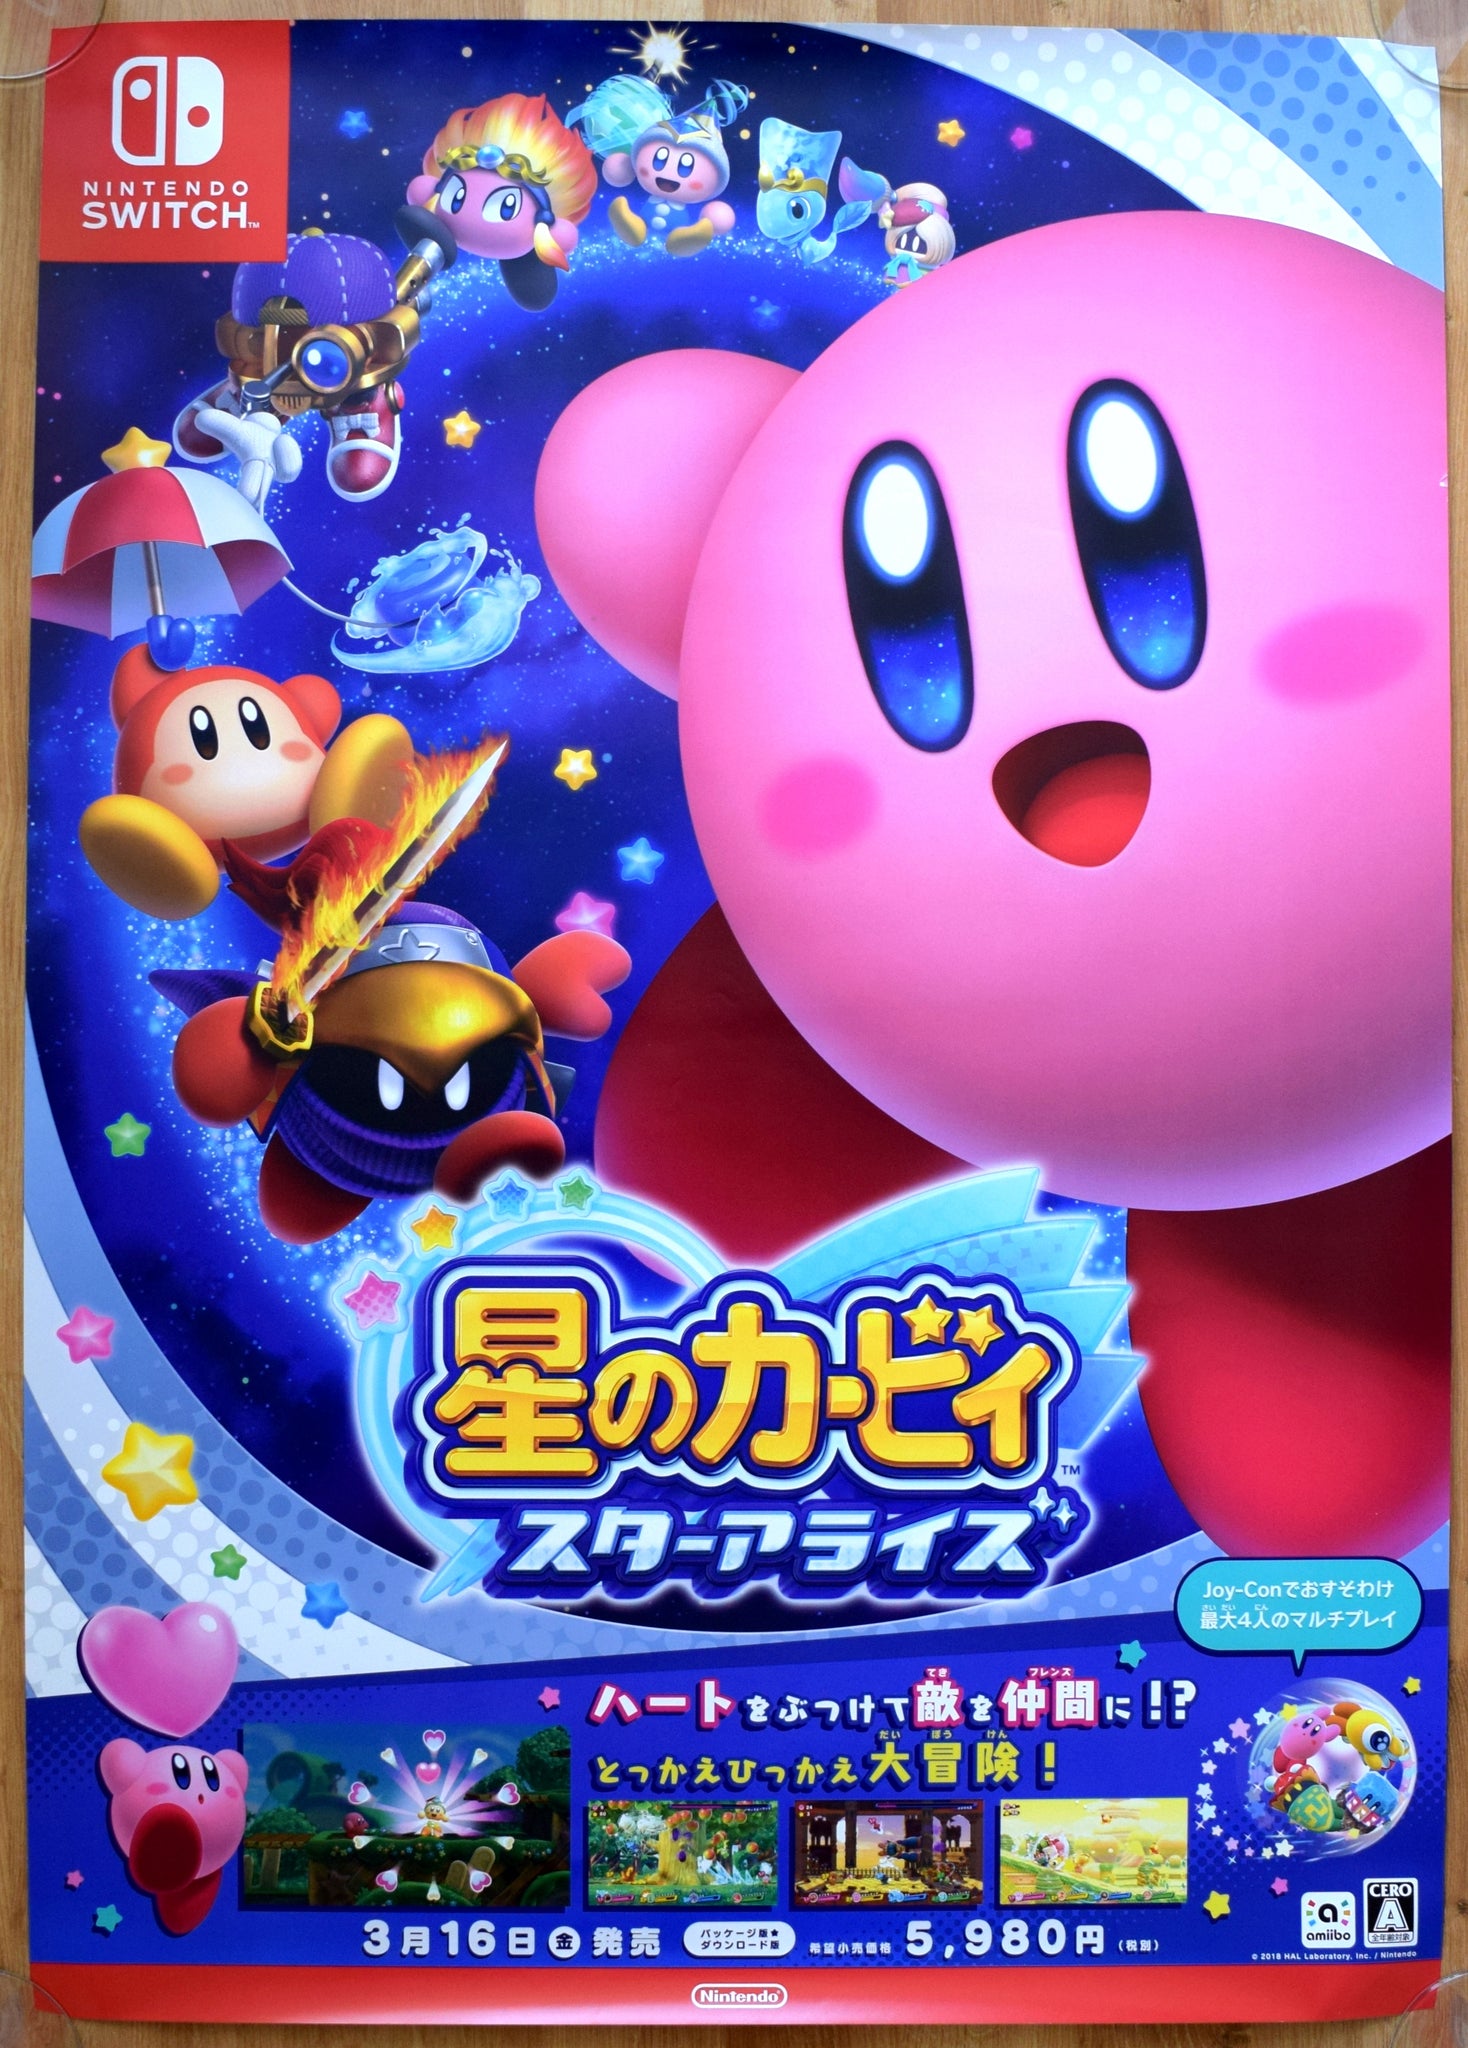 Kirby: Star Allies (B2) Japanese Promotional Poster